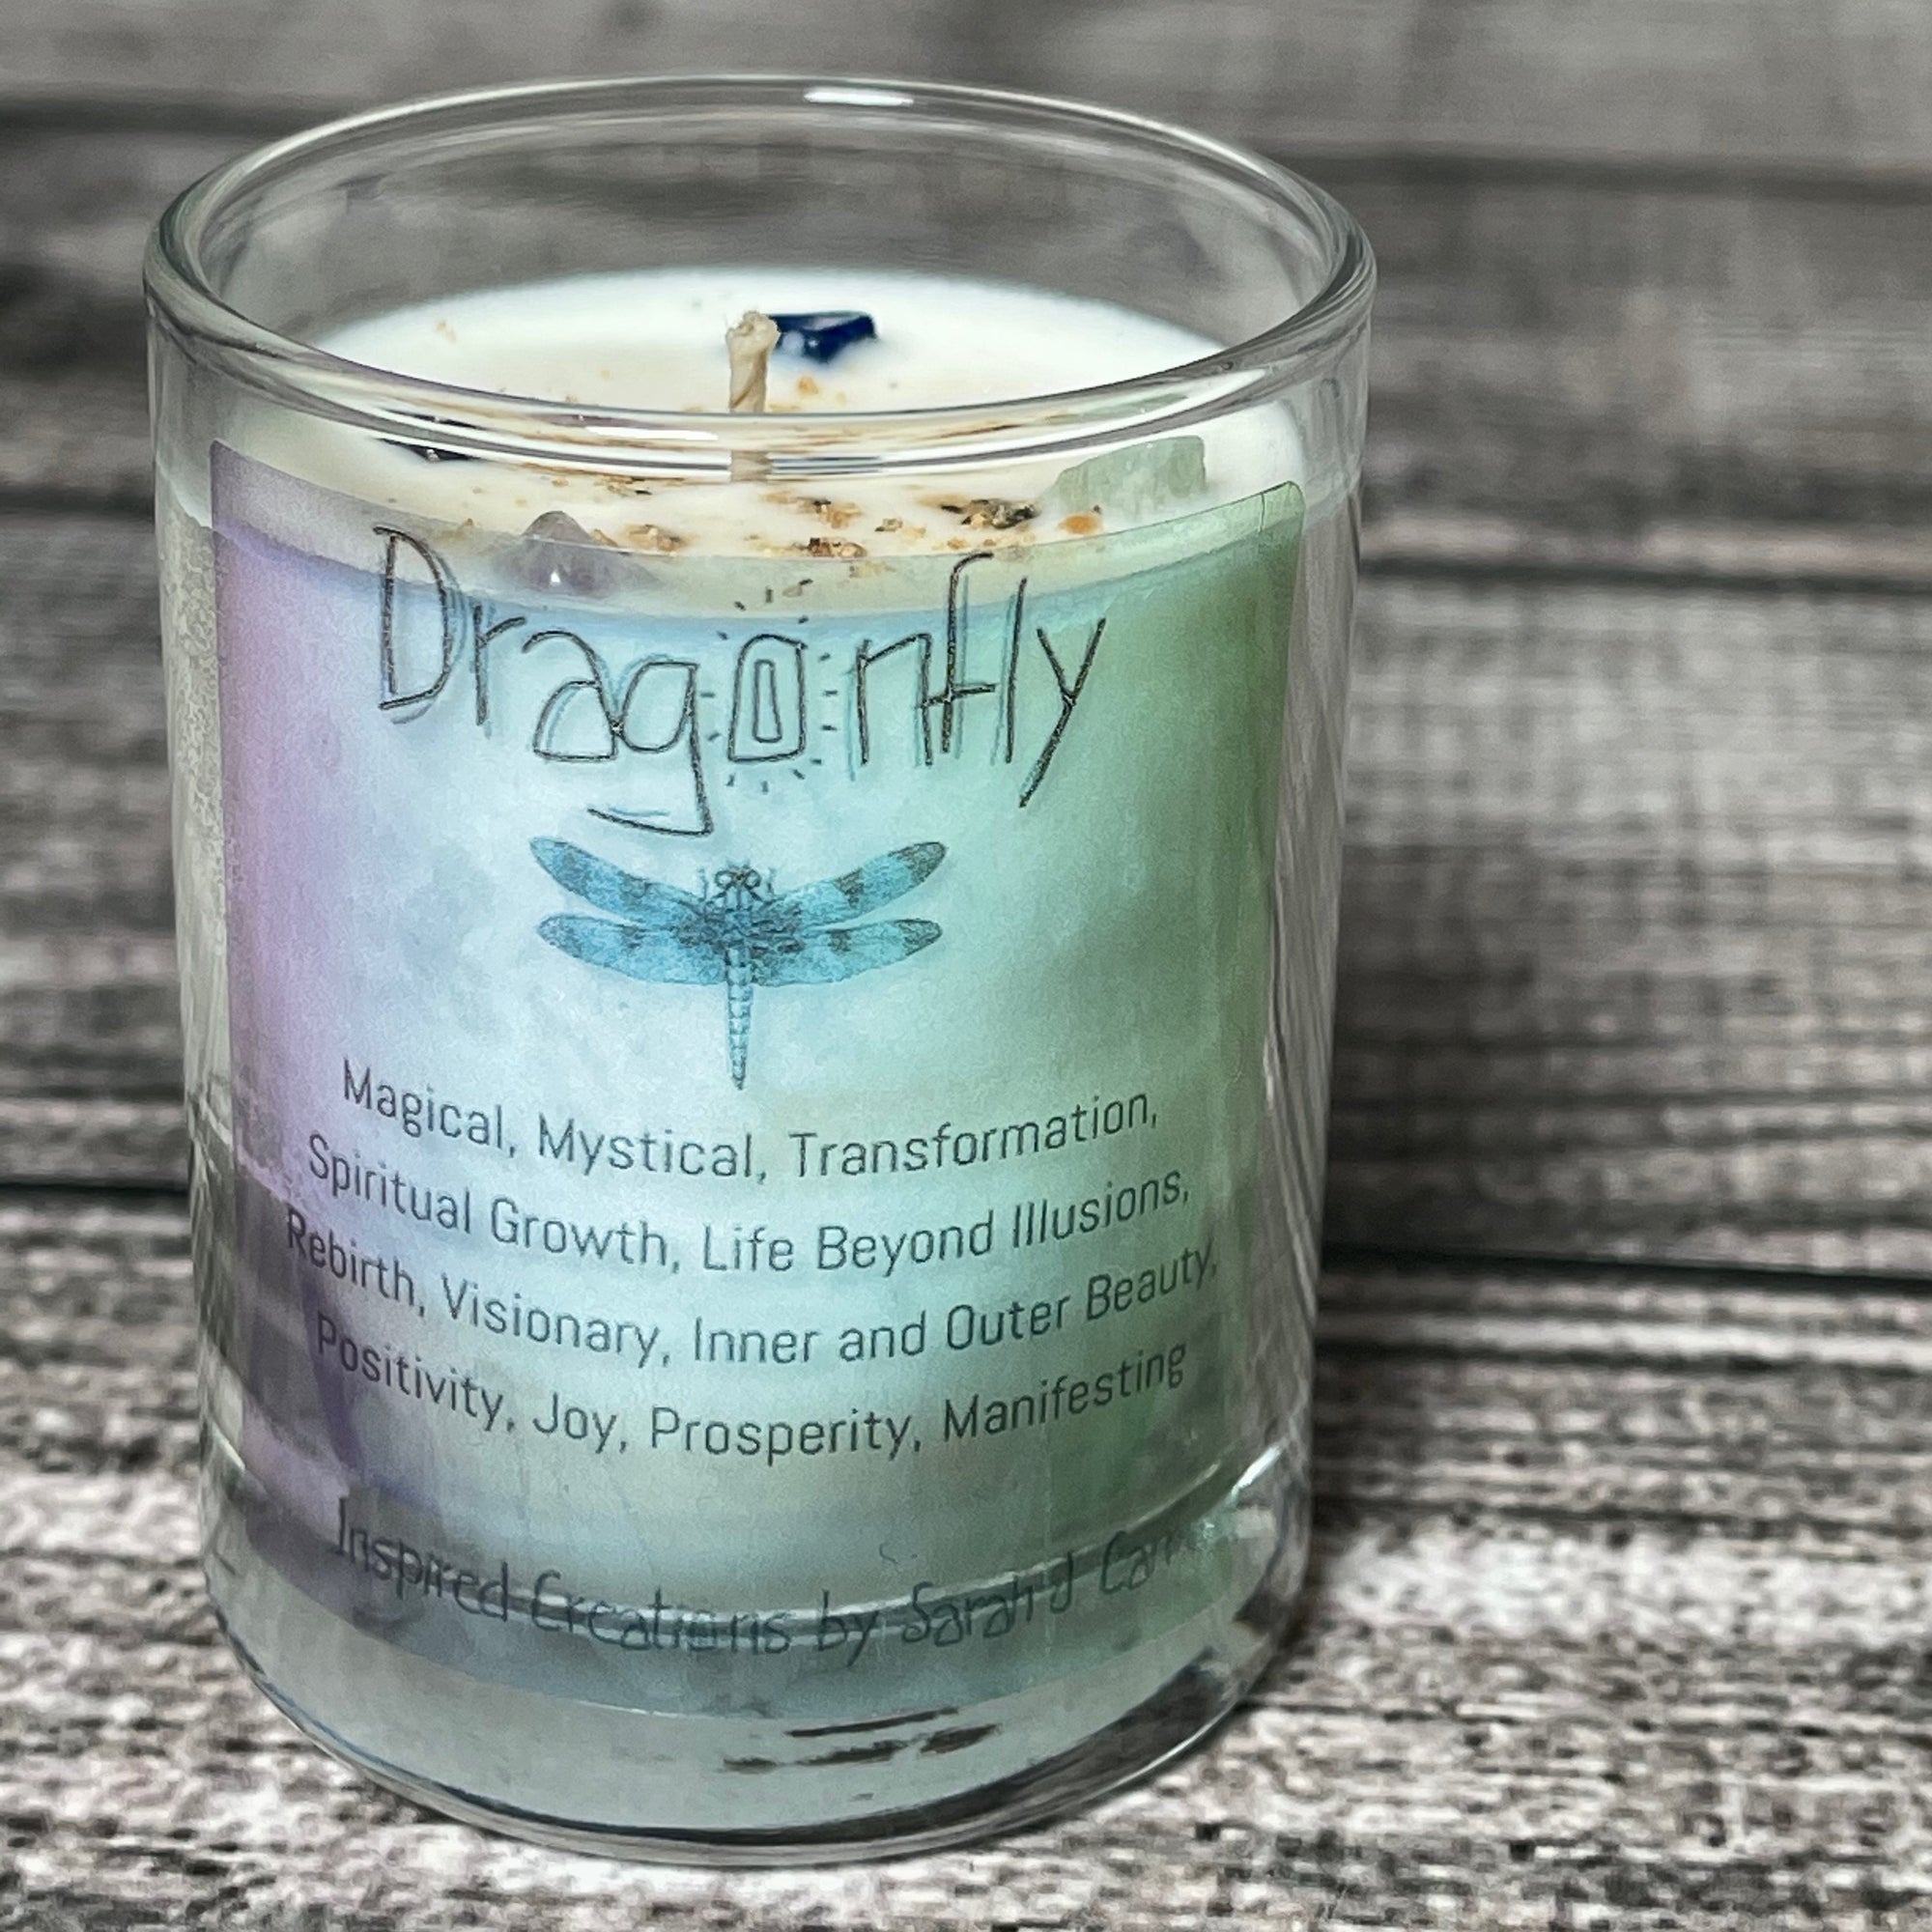 Dragonfly Magickal Manifesting Votive Candle